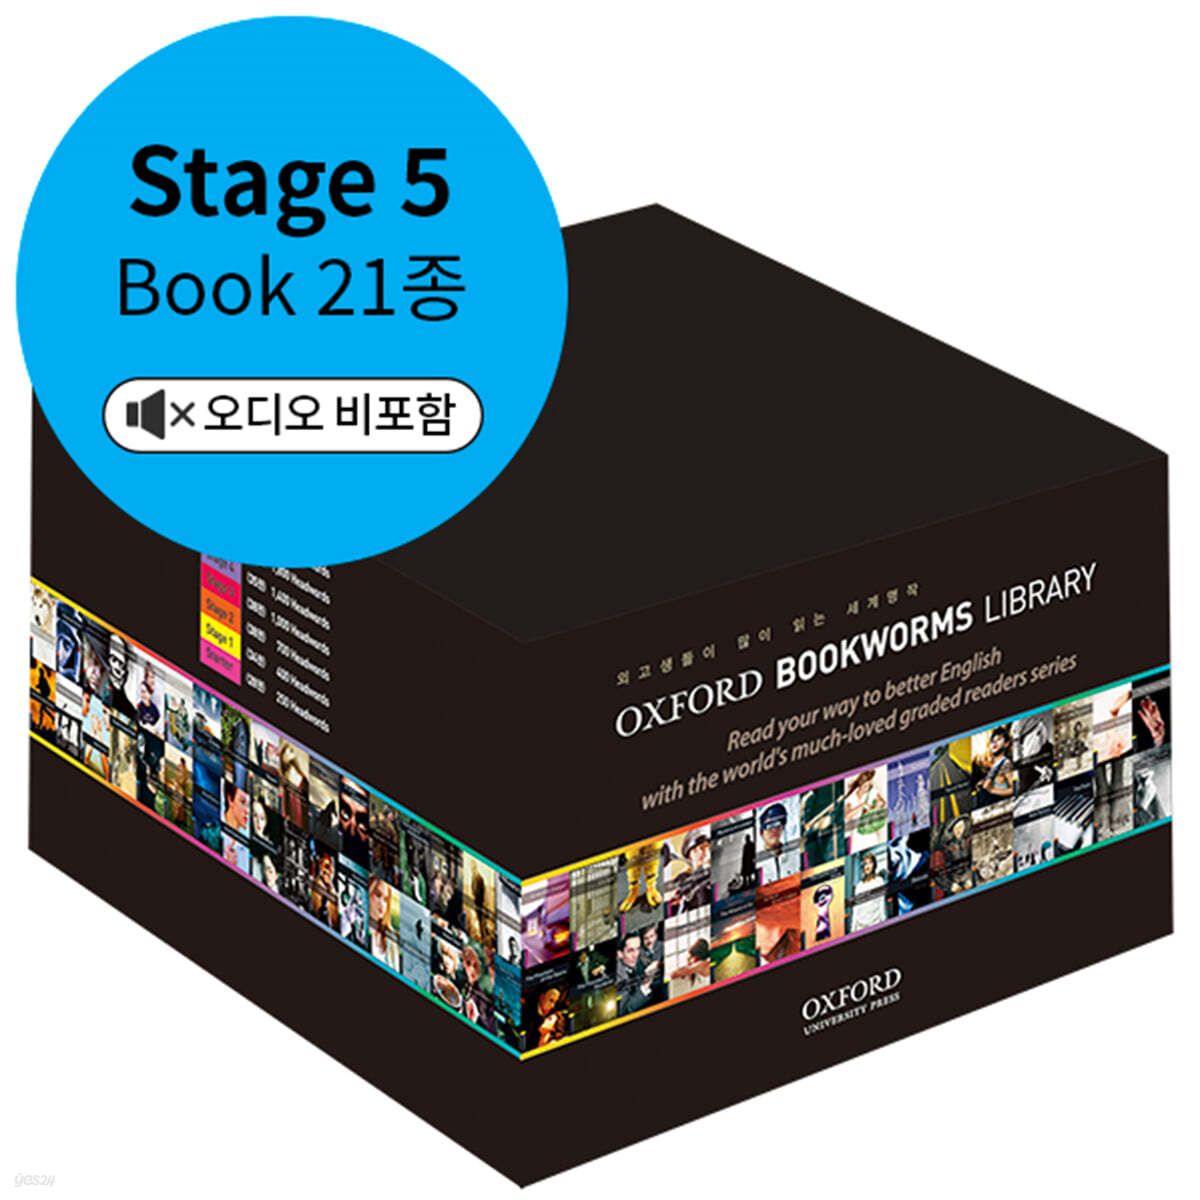 Oxford Bookworms Library Stage 5 Pack [21종]